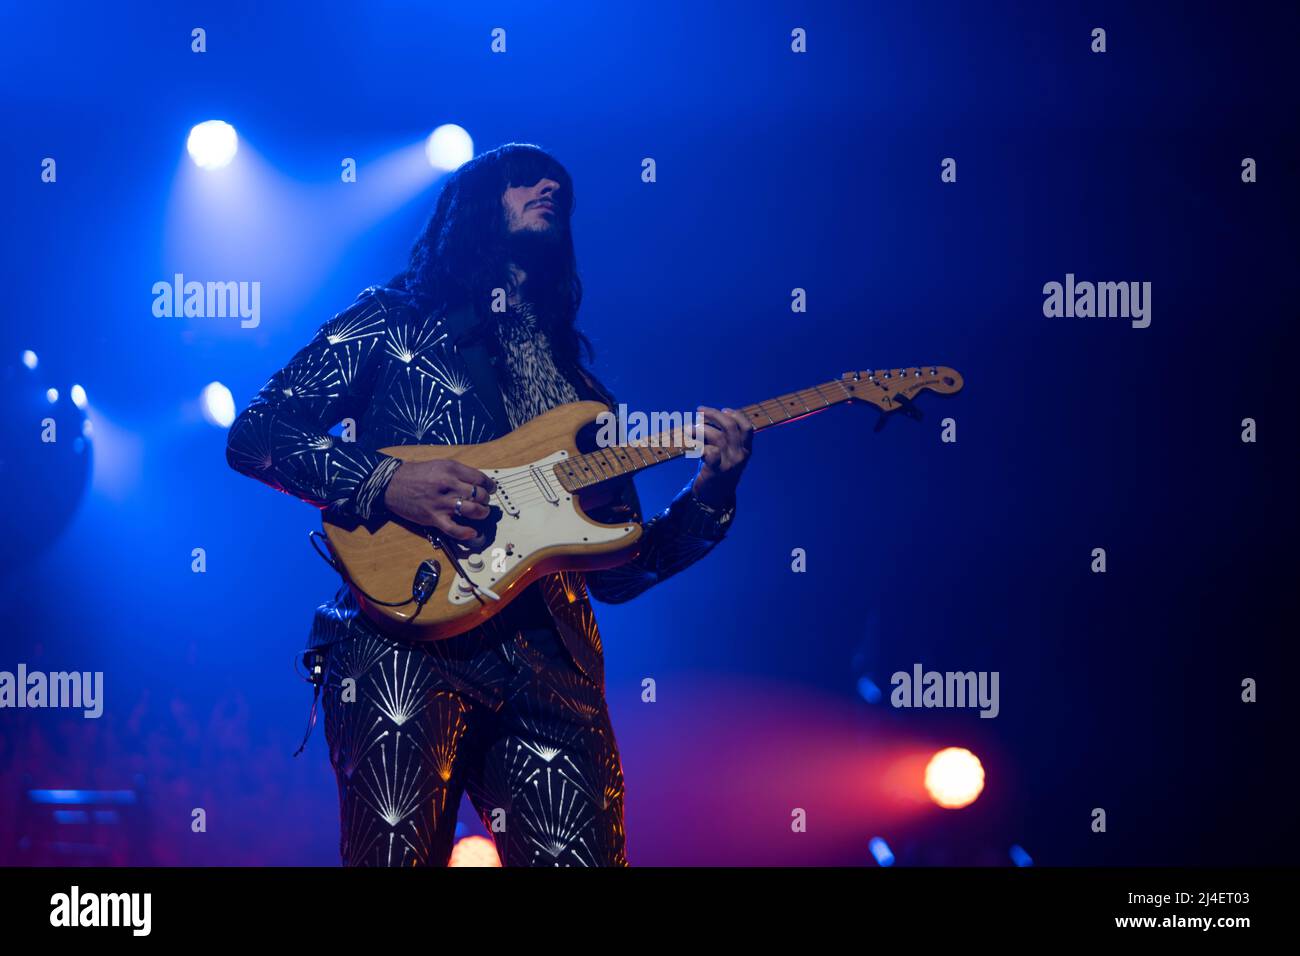 London, UK. April 14th, 2022. Mark Speer of Khruangbin performing live on stage at Alexandra Palace in London. Photo: Richard Gray/Alamy Stock Photo